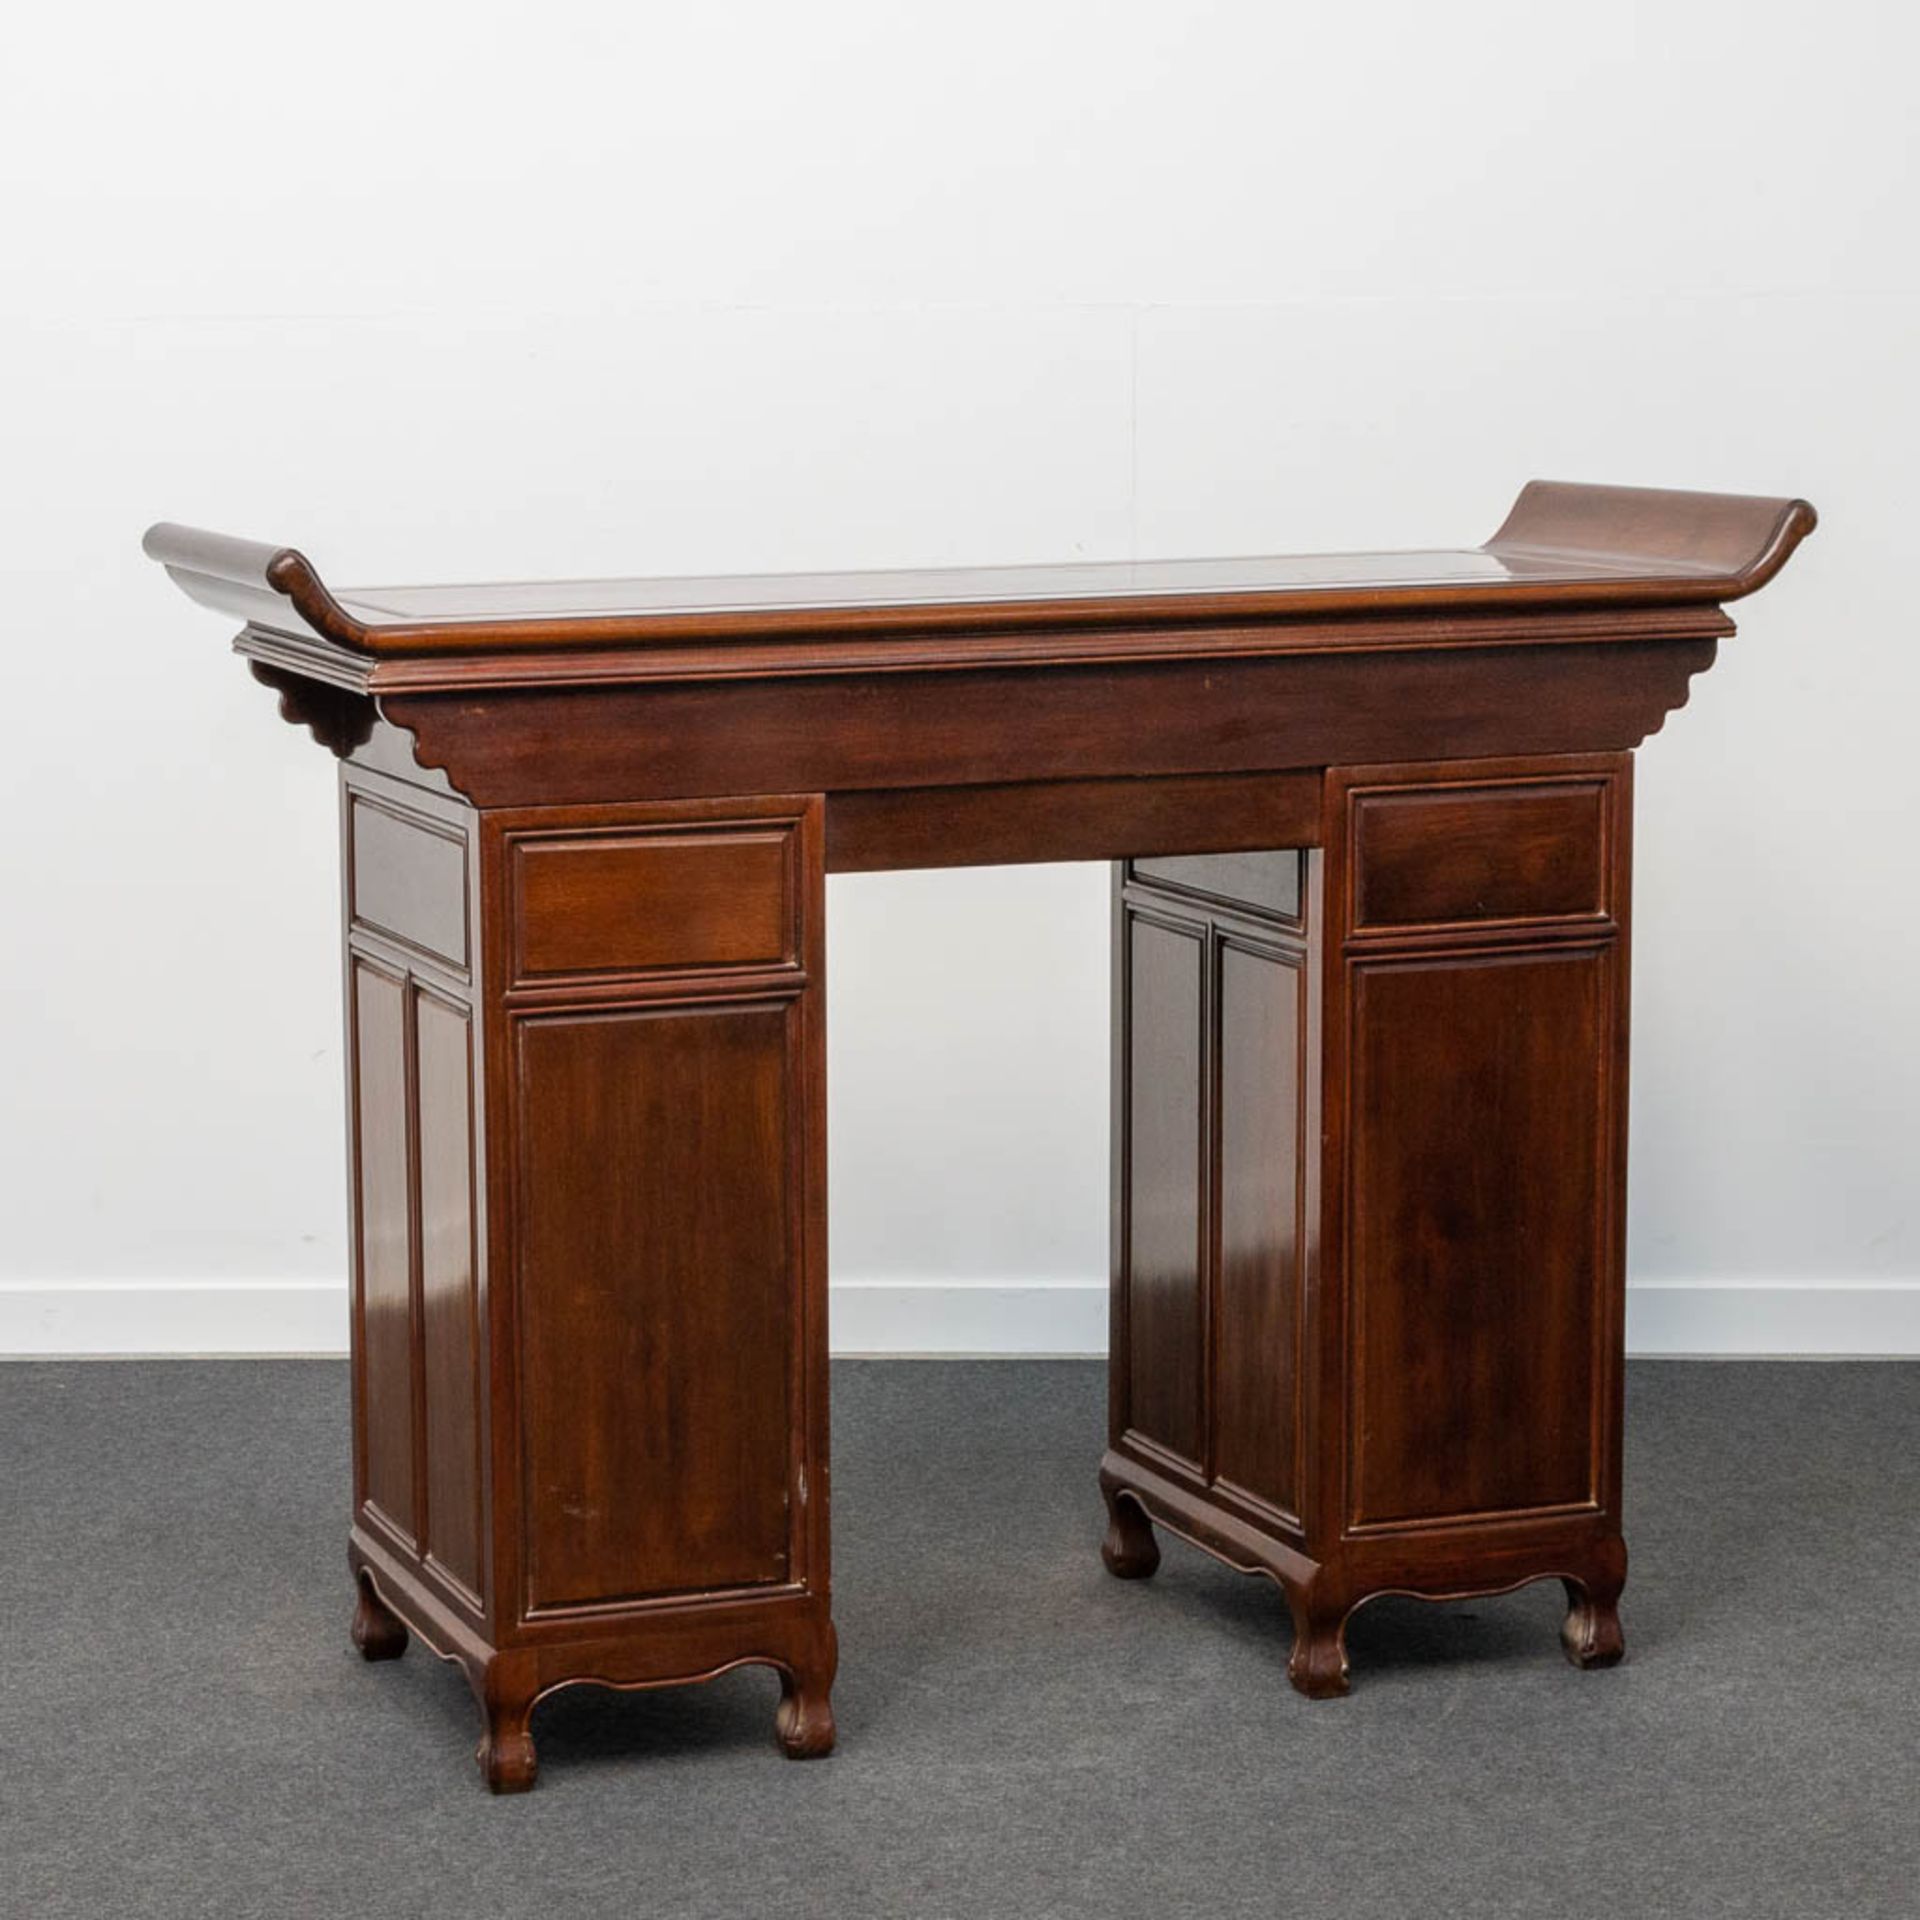 A Chinese hardwood Scroll Desk - Image 6 of 23